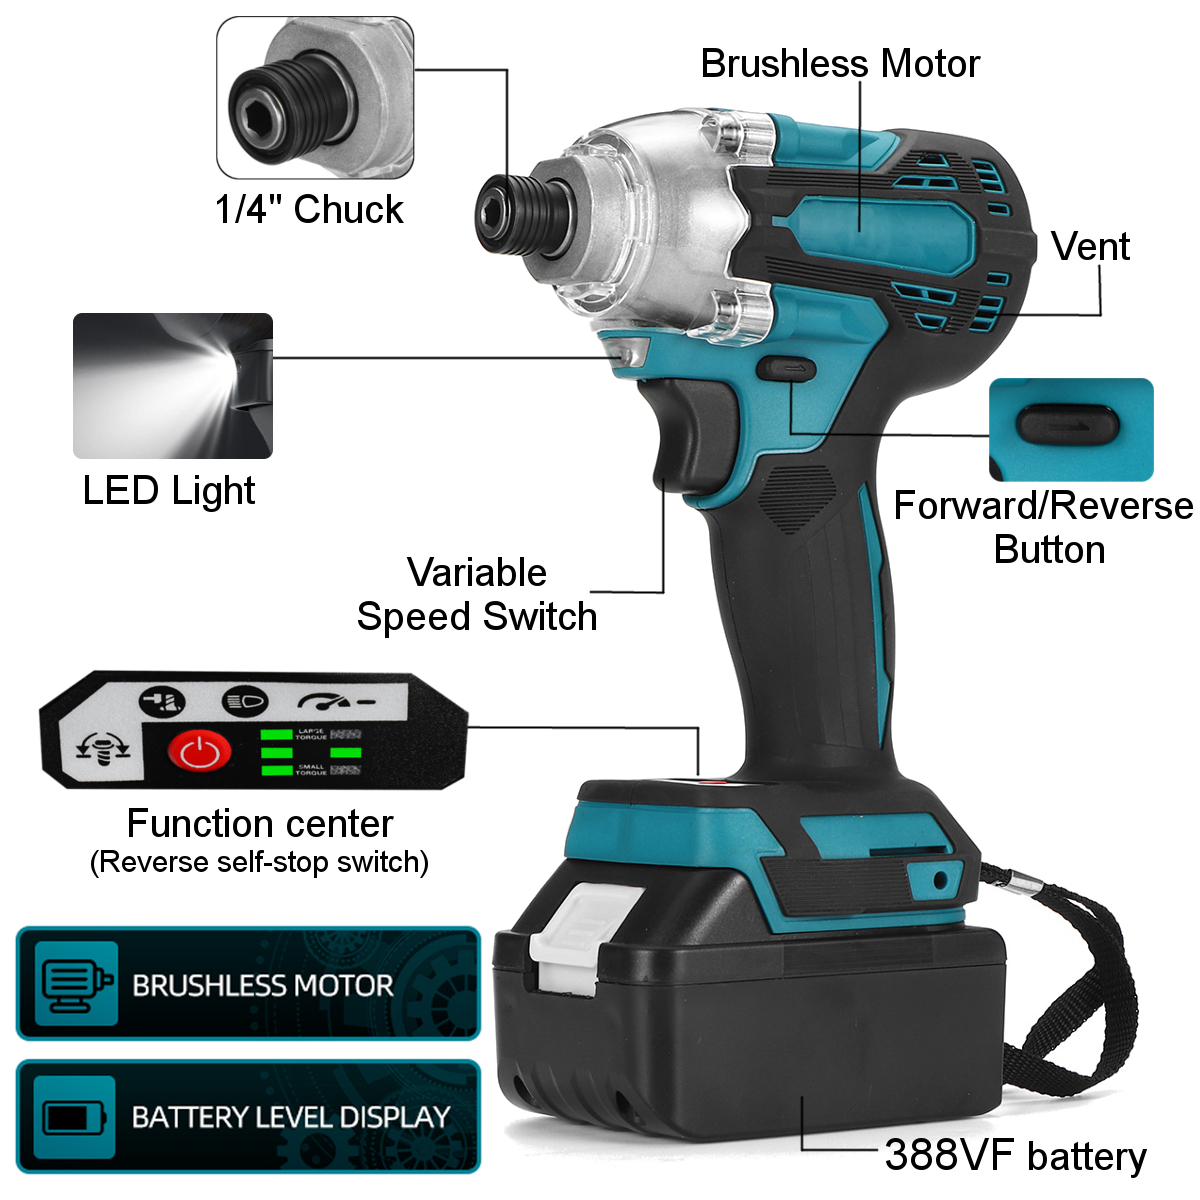 18V-14-inch-Brushless-Cordless-Electric-Screwdriver-Driver-Rechargeable-W-Battery-1790859-4